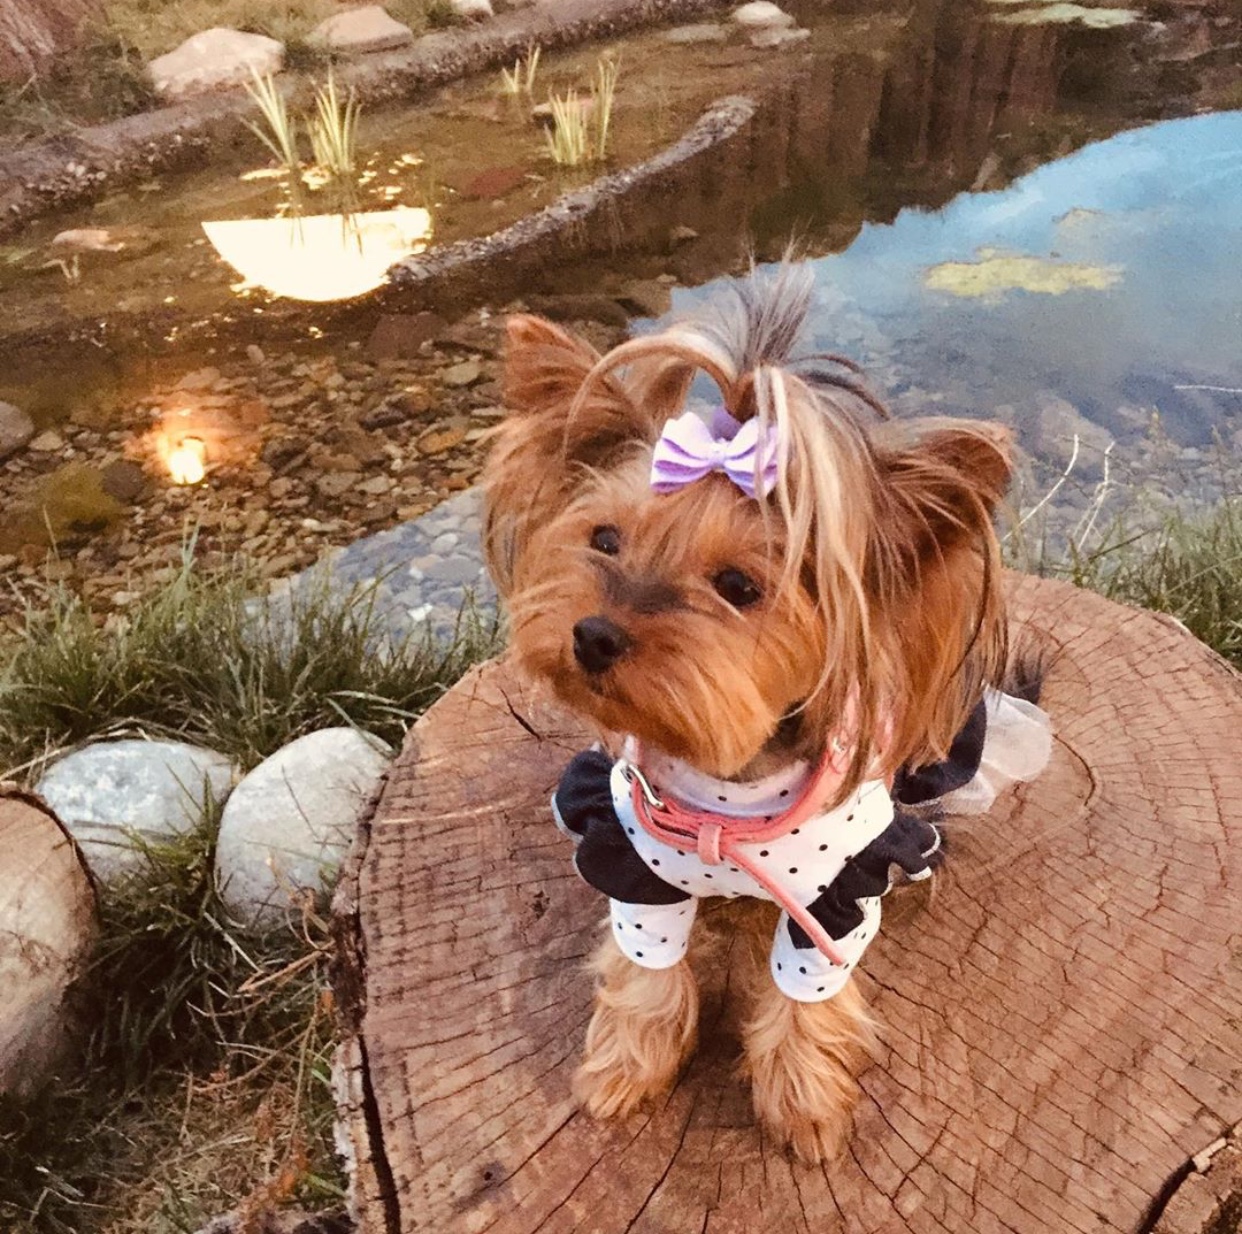 A Yorkshire Terrier wearing a cute dress while sitting on top of the chopped wooden trunk by the lake